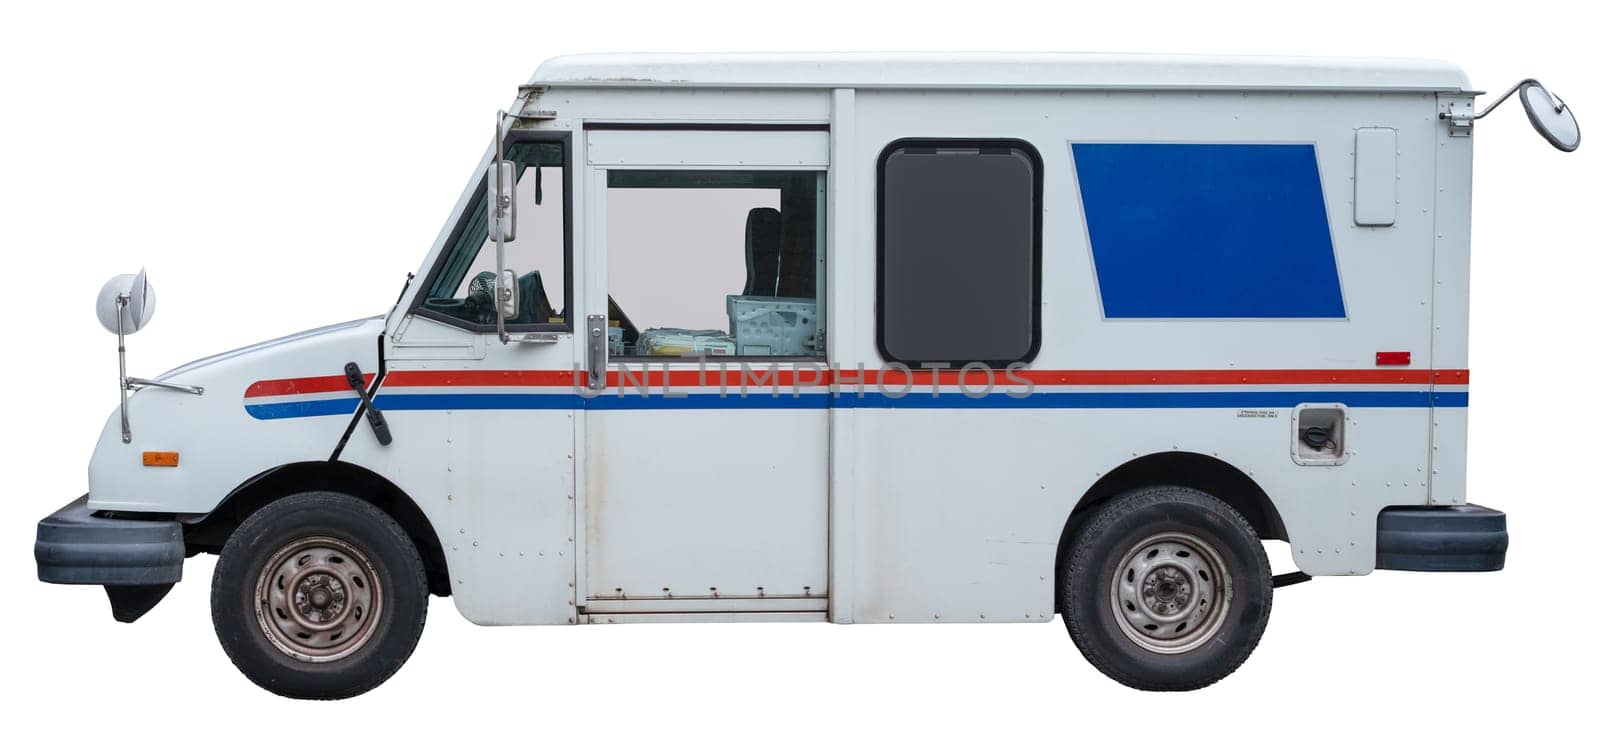 Grungy Mail Delivery Truck (Post Delivery Van) Isolated On A White Background